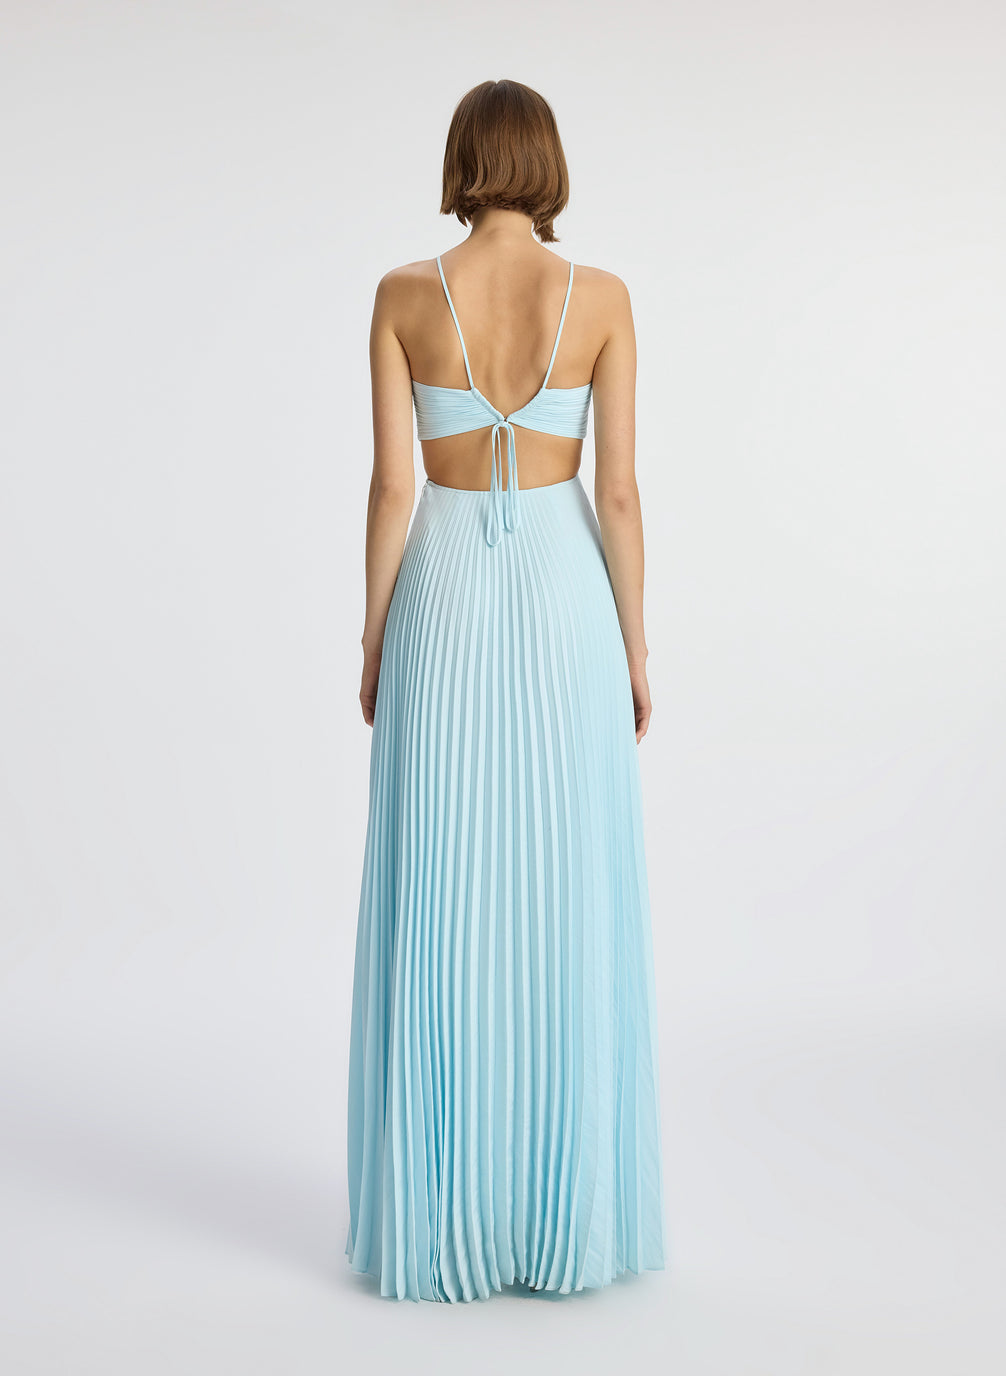 back  view of woman wearing aqua satin pleated gown